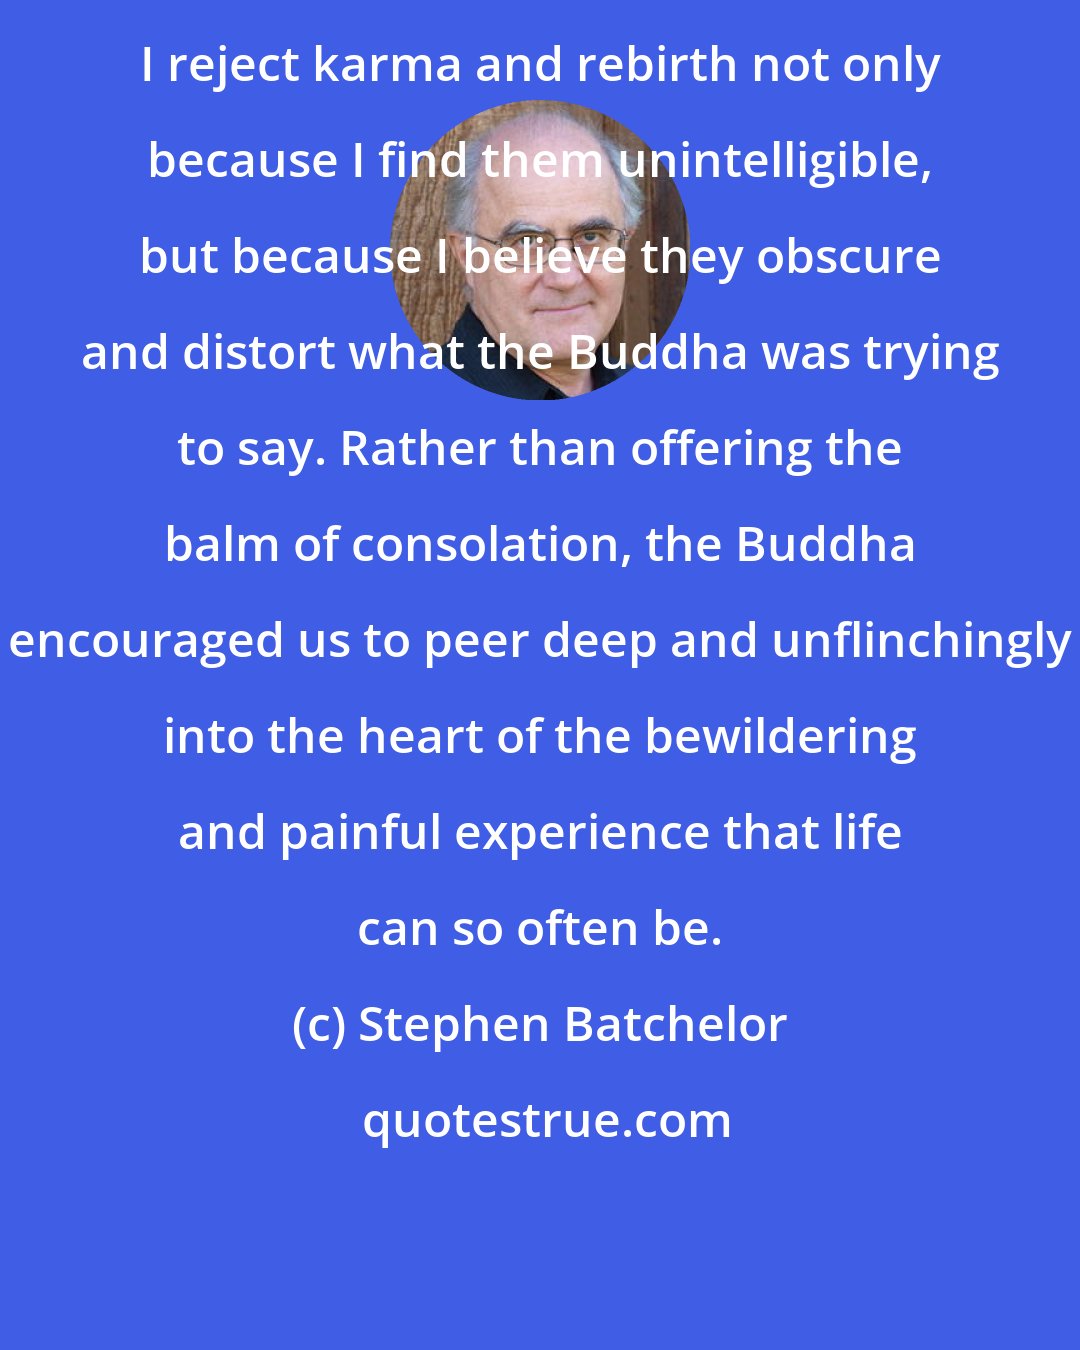 Stephen Batchelor: I reject karma and rebirth not only because I find them unintelligible, but because I believe they obscure and distort what the Buddha was trying to say. Rather than offering the balm of consolation, the Buddha encouraged us to peer deep and unflinchingly into the heart of the bewildering and painful experience that life can so often be.